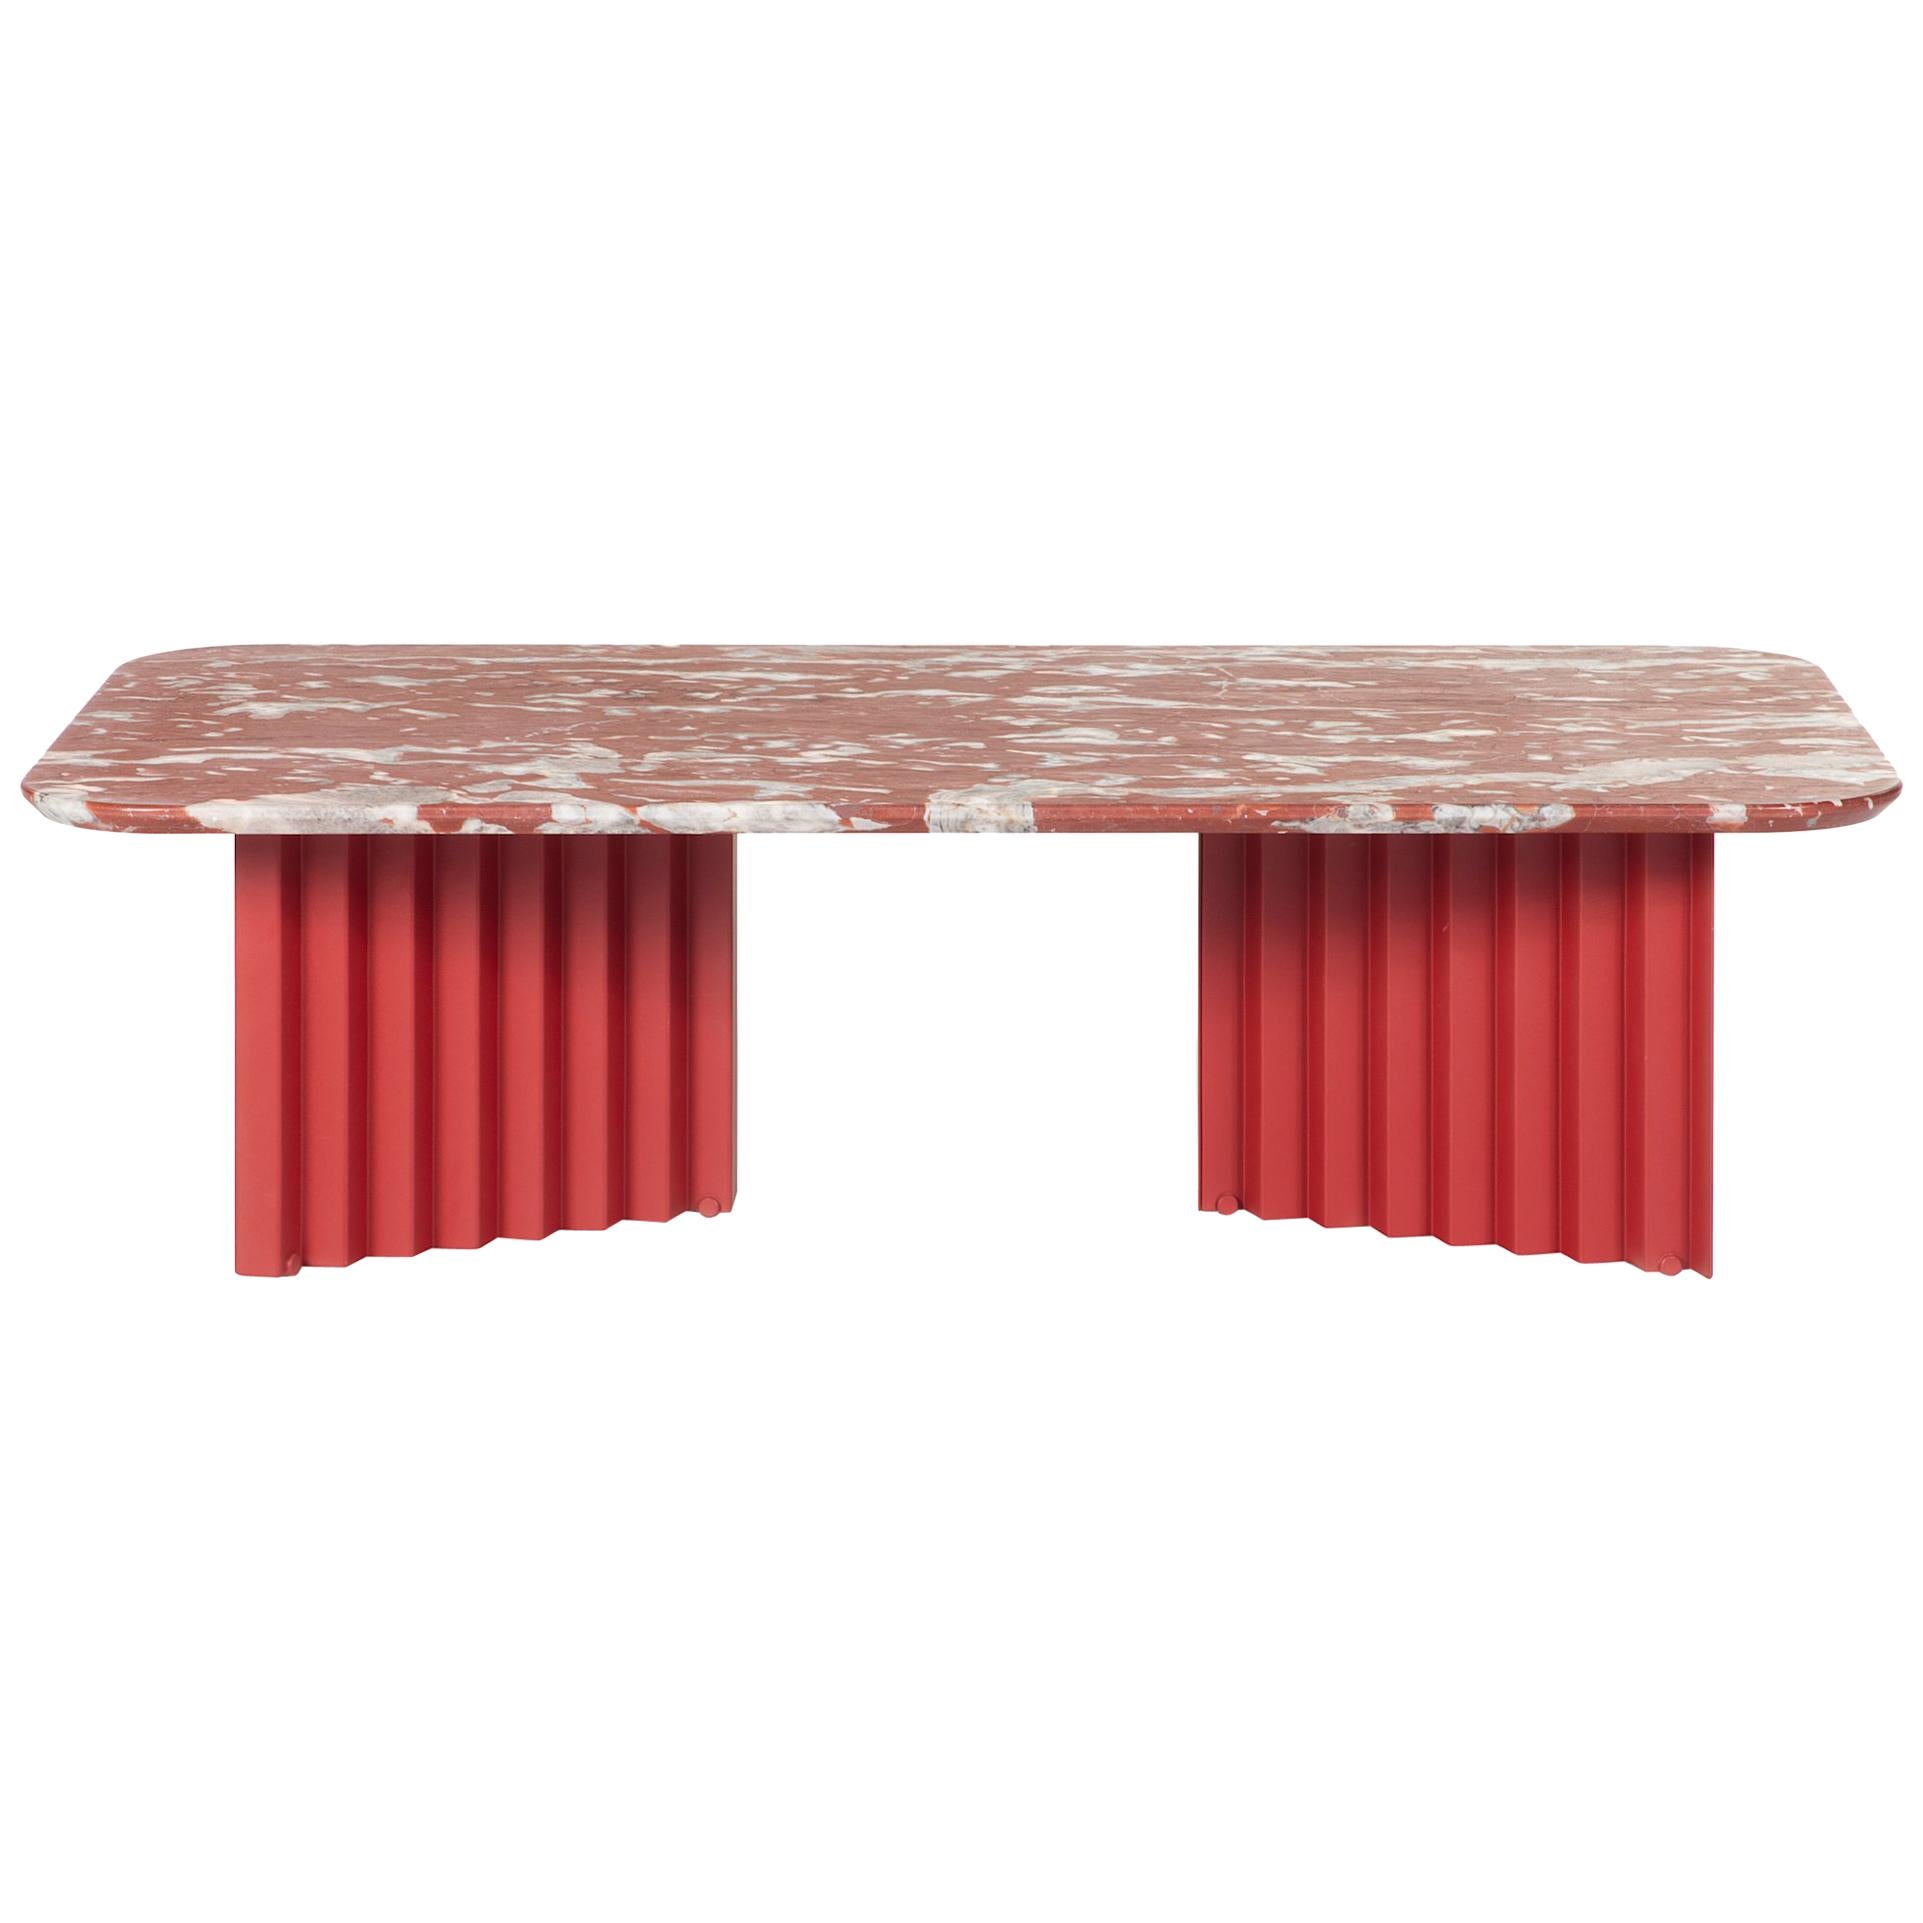 RS Barcelona Plec Large Table in Red Marble by A.P.O. For Sale